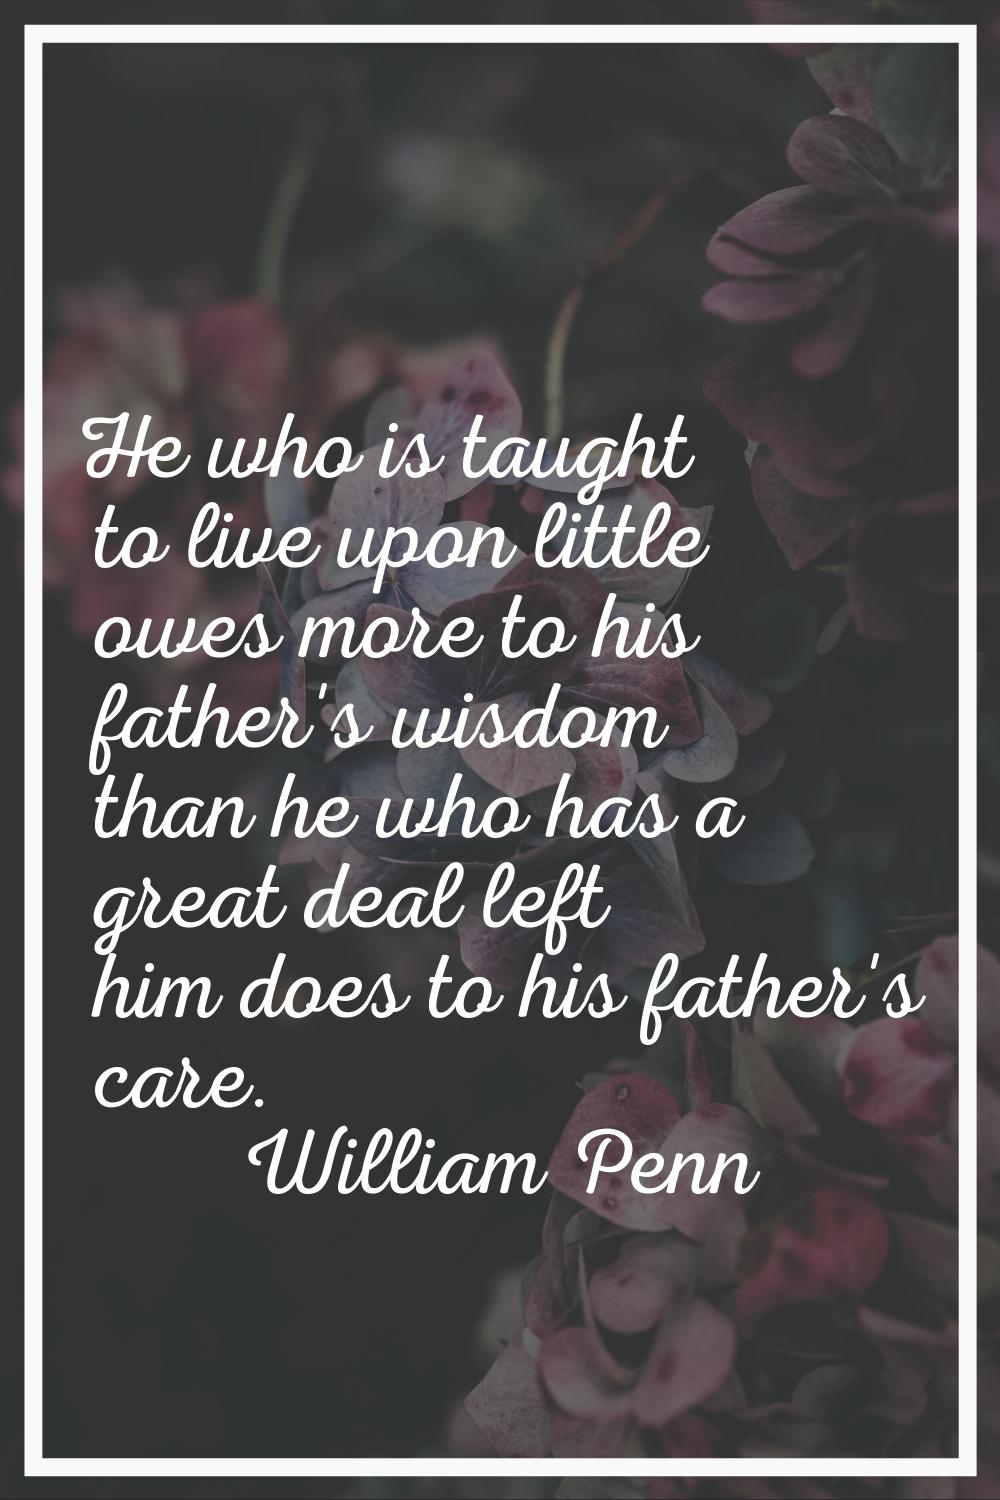 He who is taught to live upon little owes more to his father's wisdom than he who has a great deal 